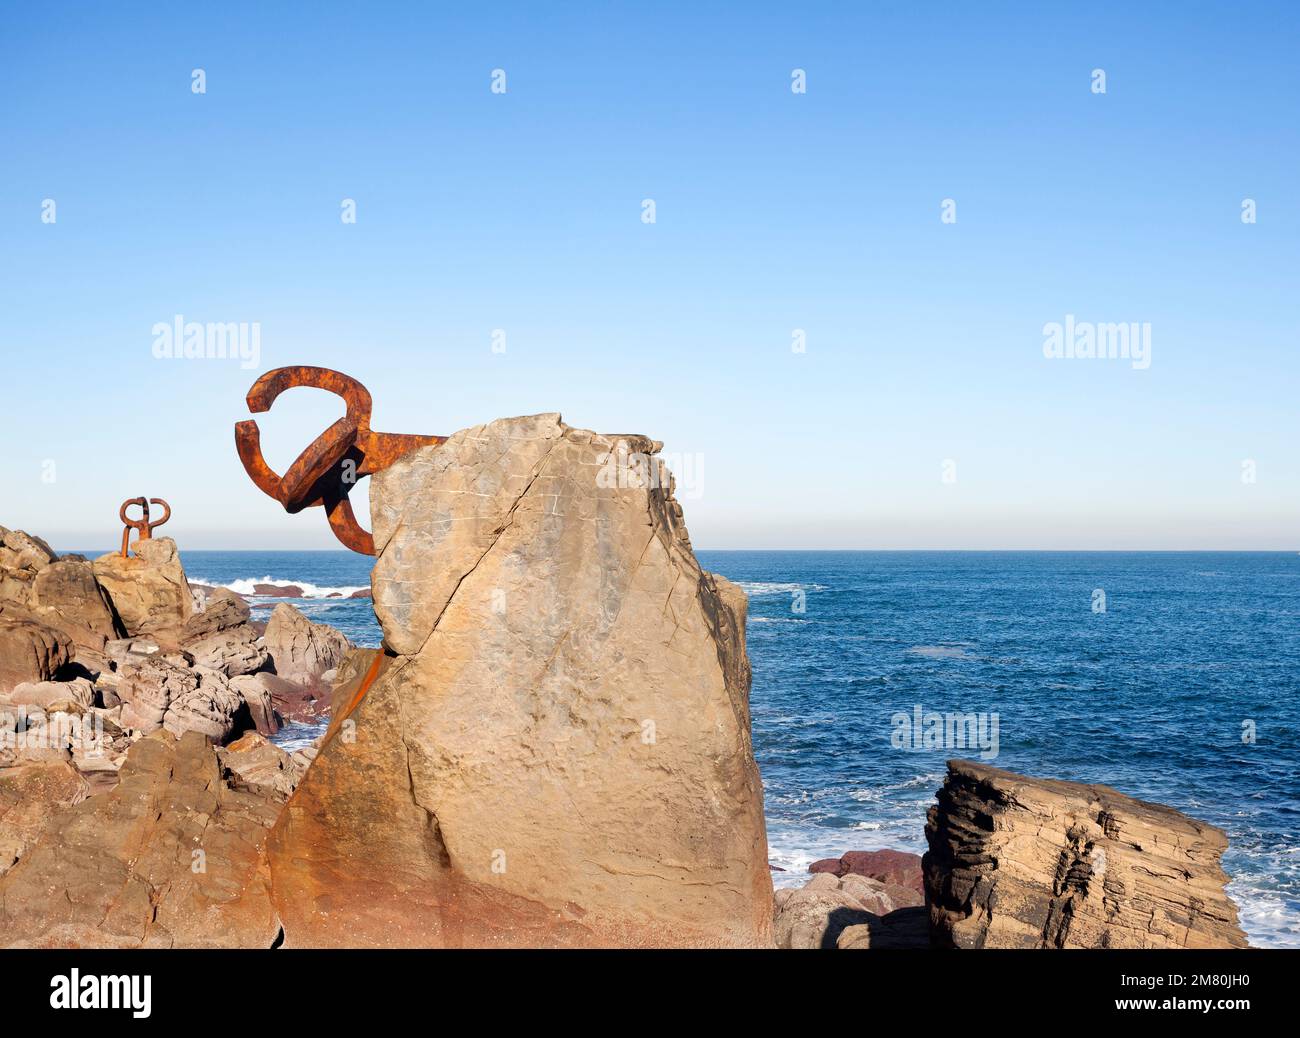 Donosti, Spain-December 22, 2014: On sunny days,in the end of the la Concha beach you can see Chillida's sculptures Stock Photo